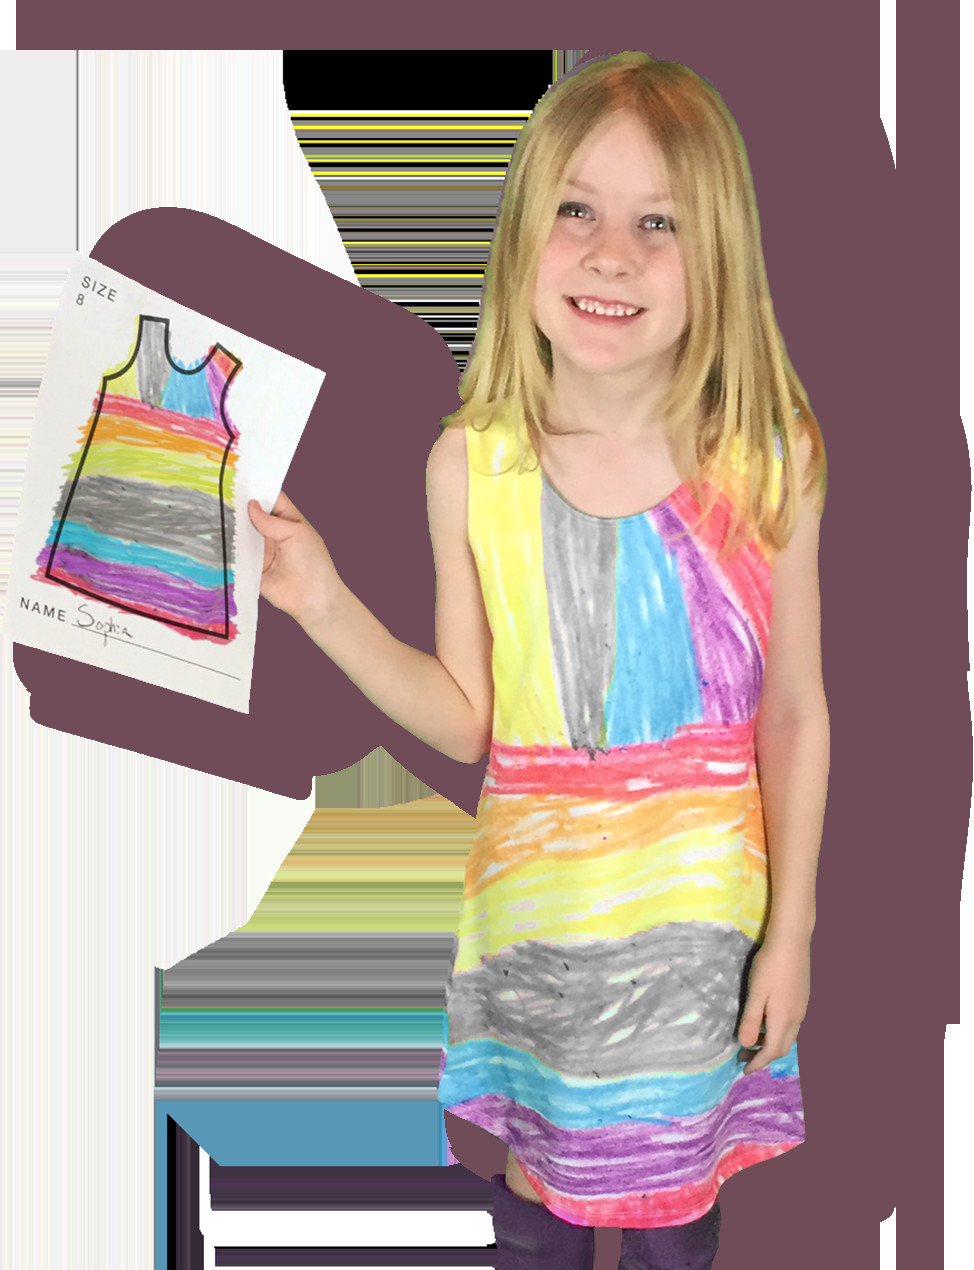 Kids Design Own Dress
 Picture This Lets Your Kid Design Her Own Dresses